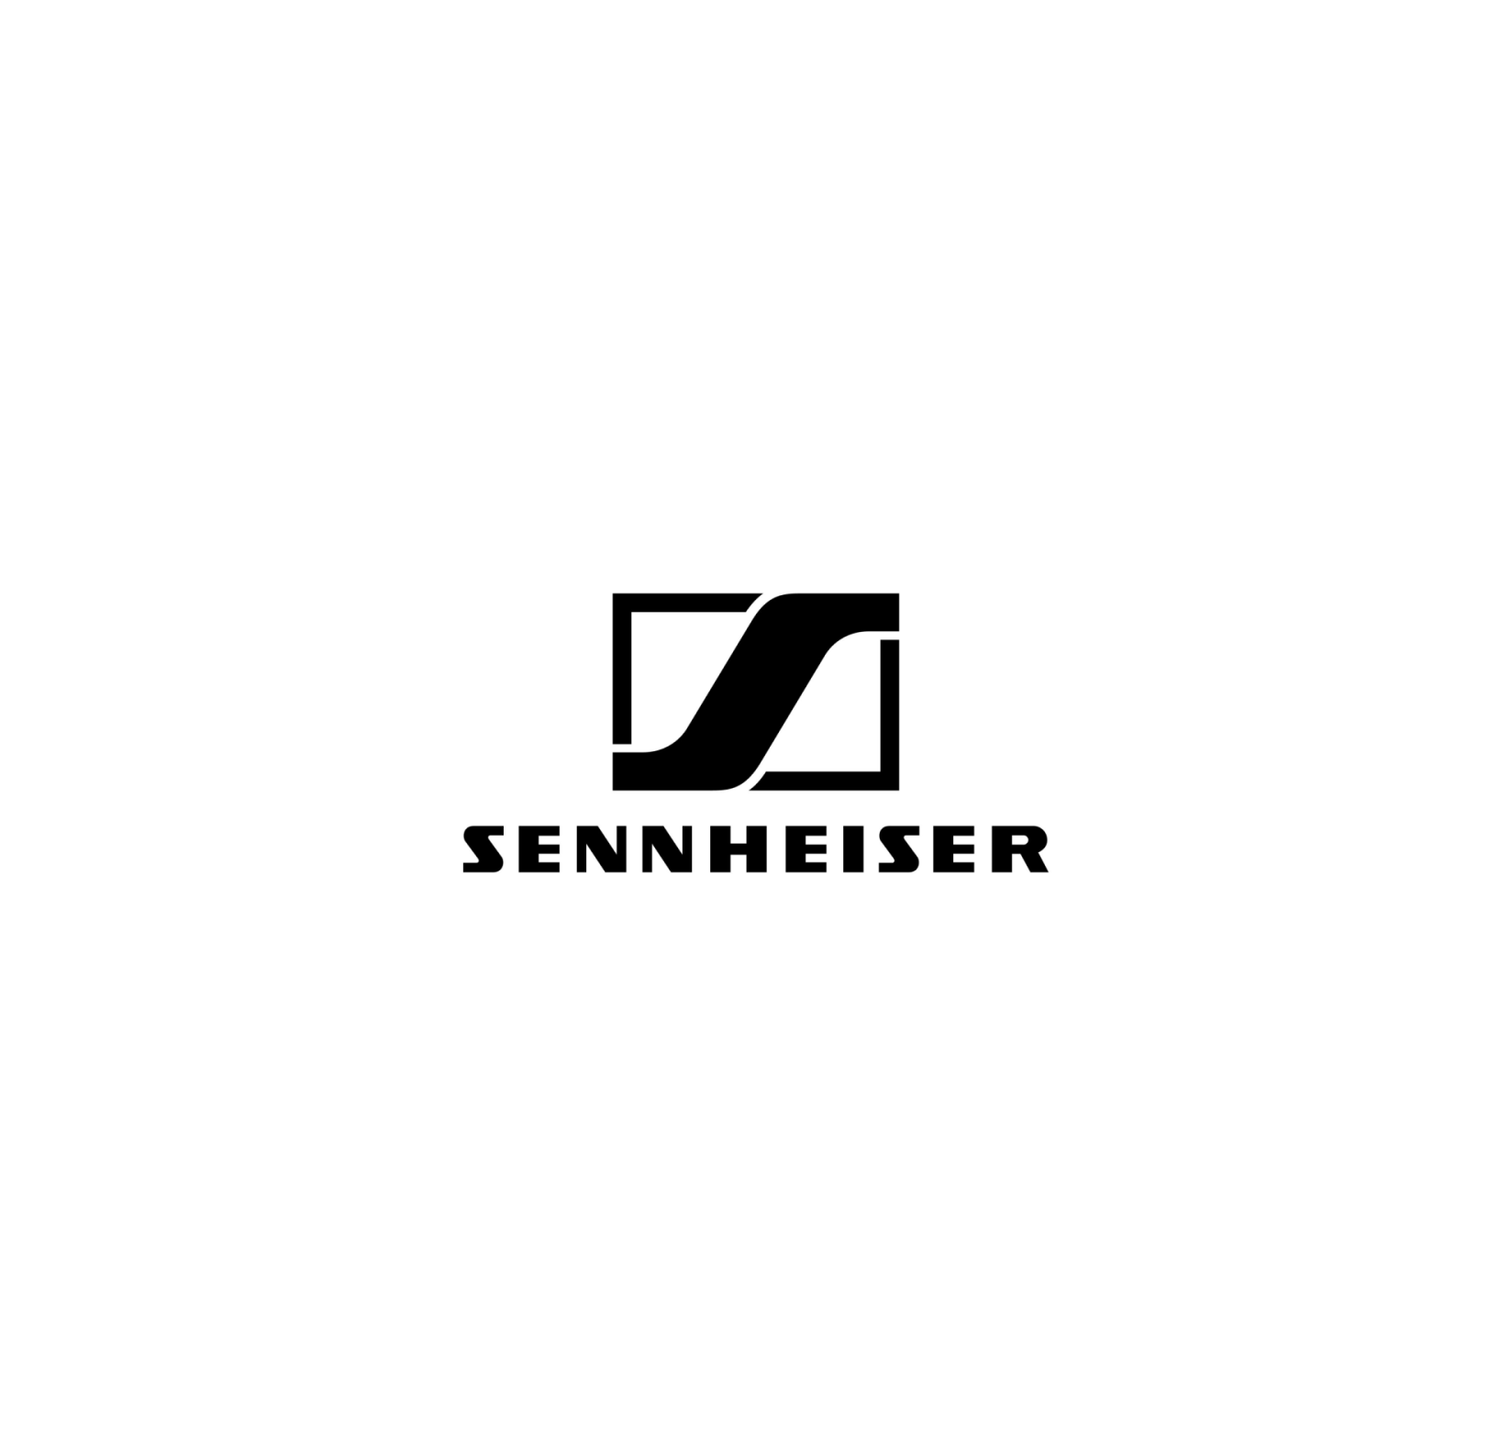 Copoint Supplier Distributor of Sennheiser ATC Headsets